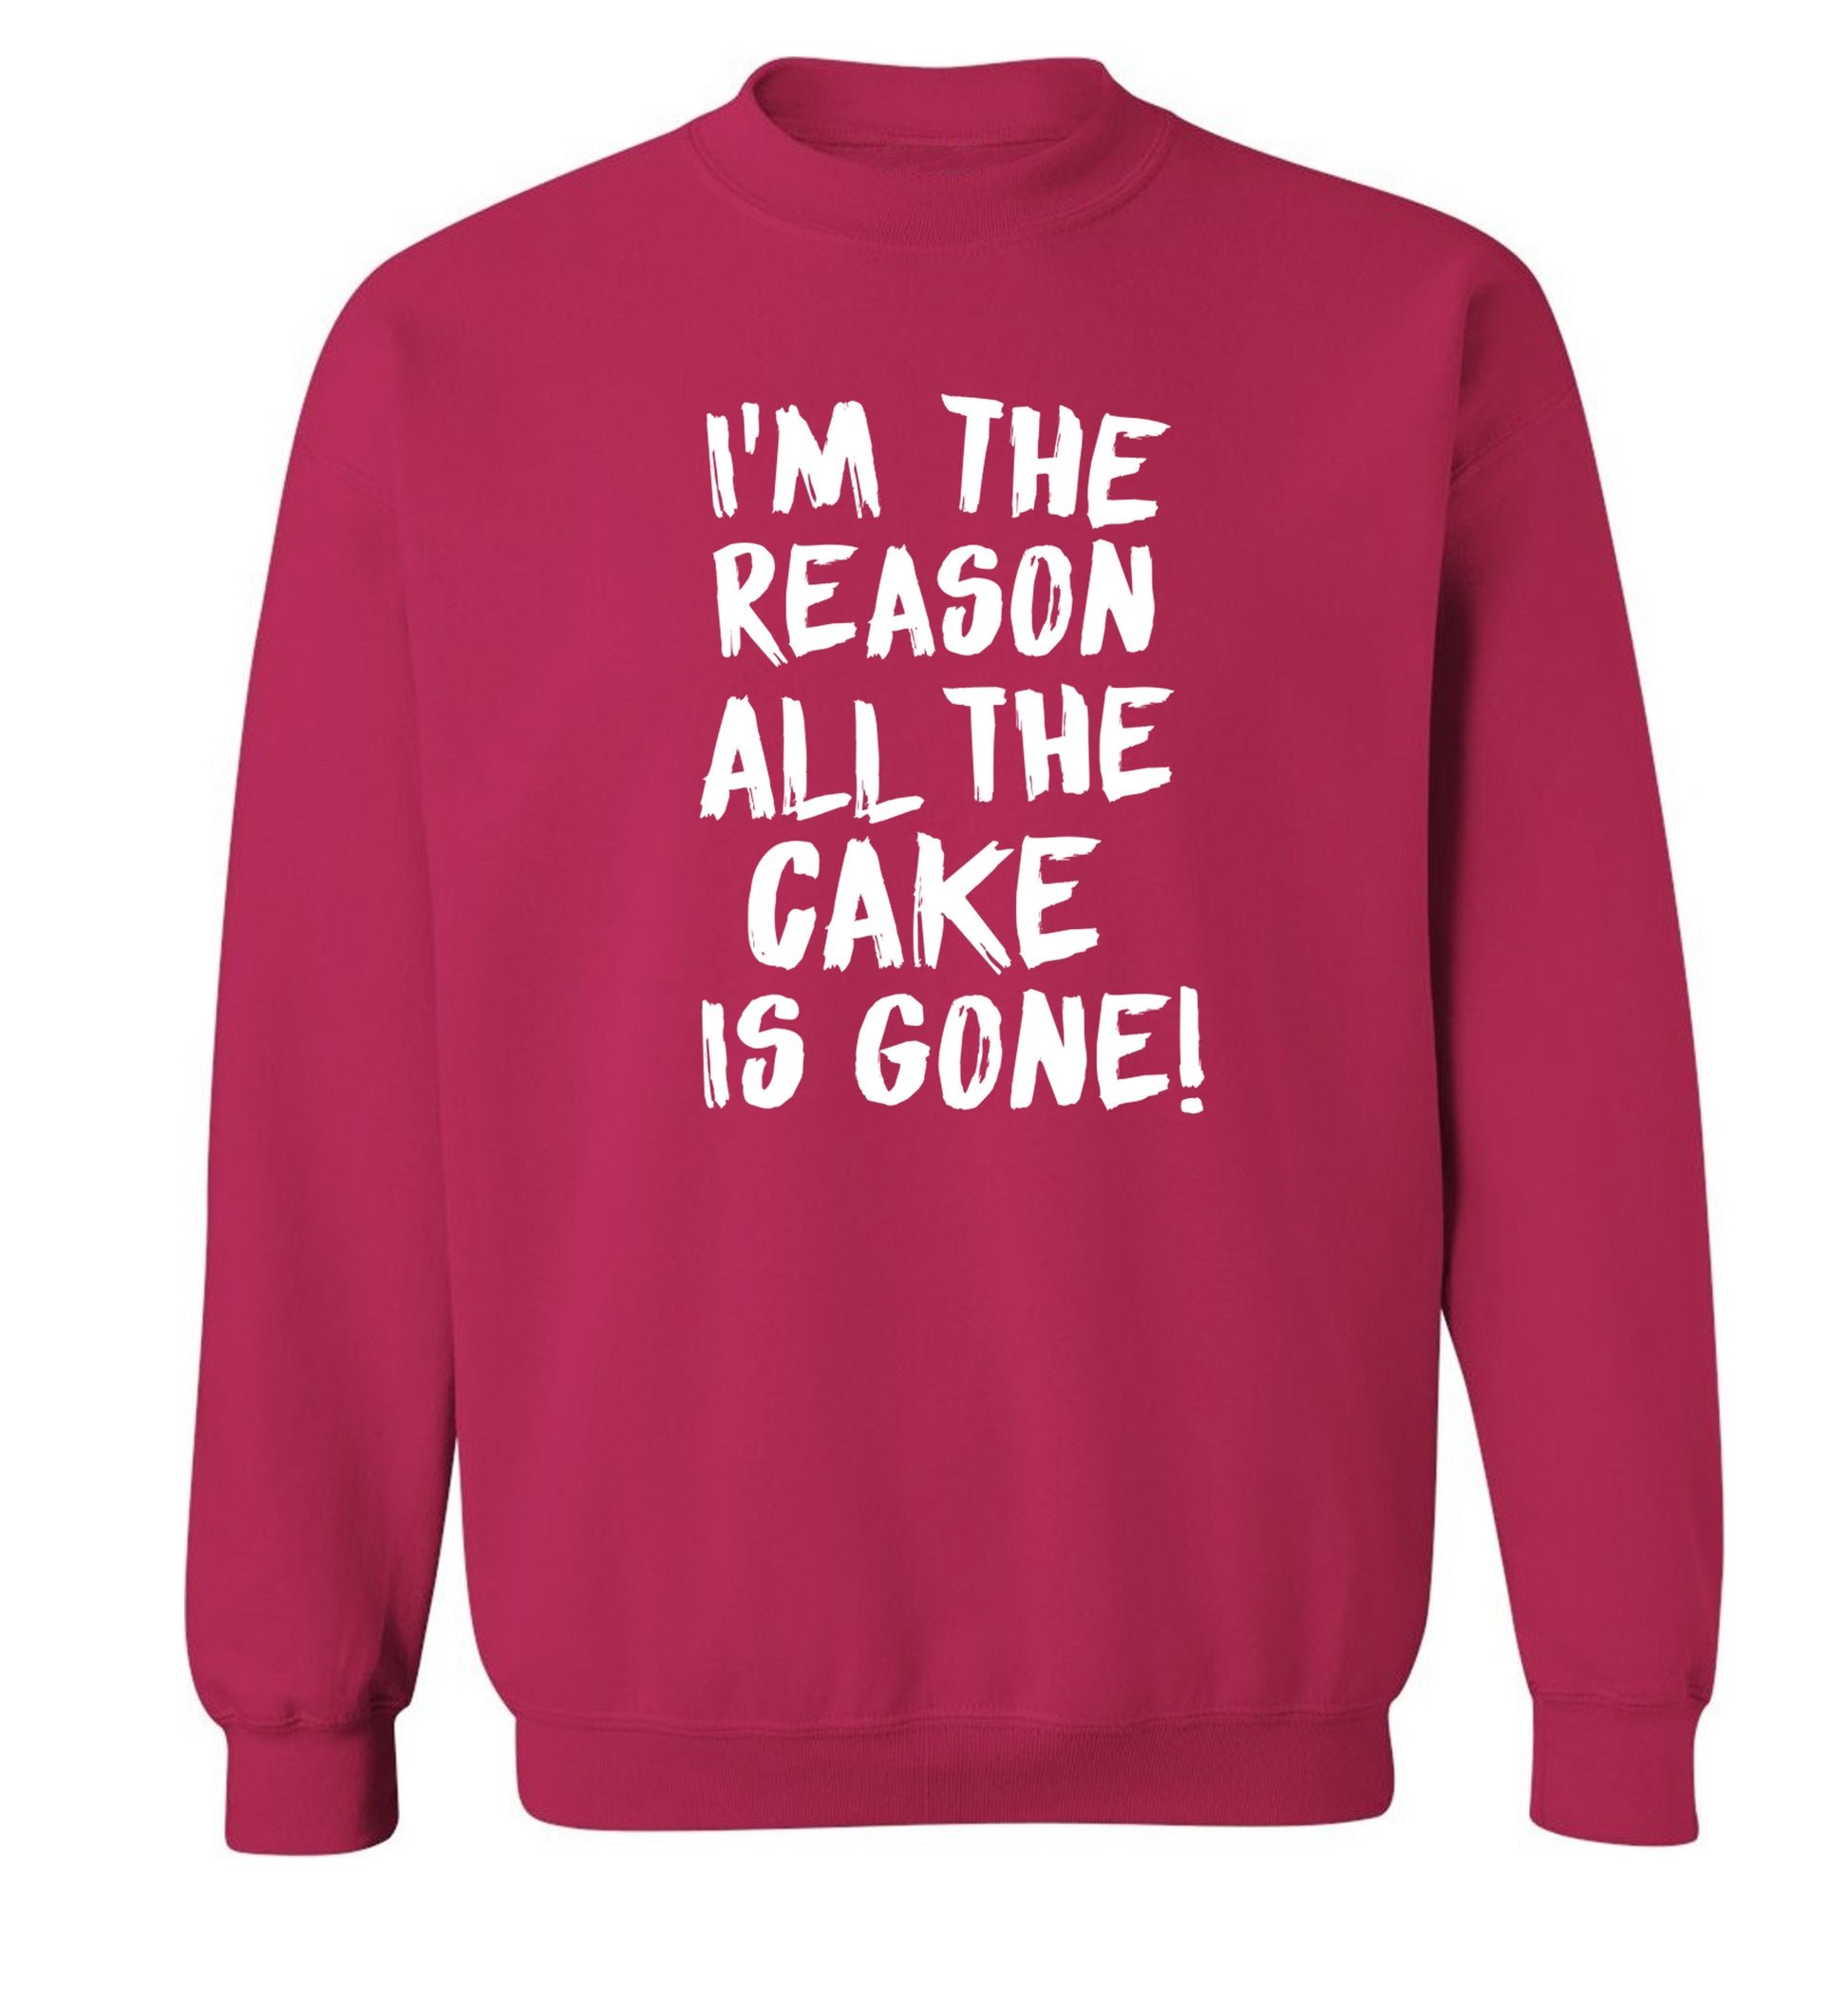 I'm the reason all the cake is gone Adult's unisex pink Sweater 2XL